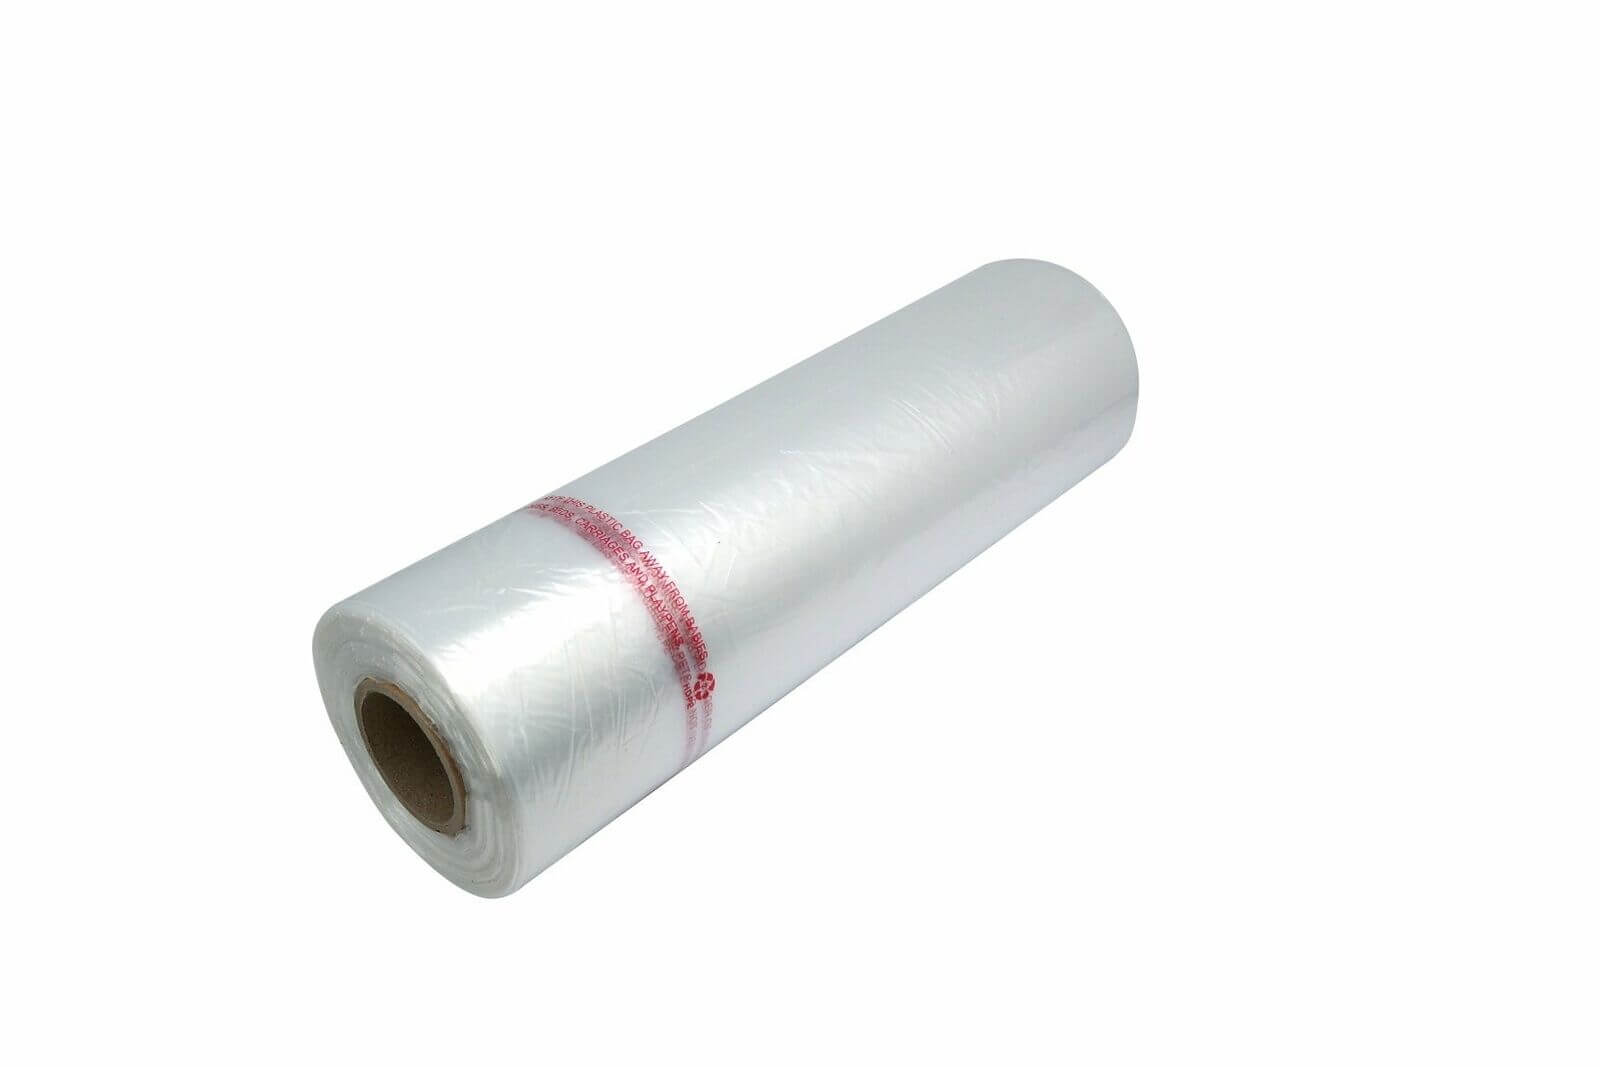 HDPE Clear Plastic Bag 11X19 Case 4 roll - #163042 - Premier Nail Supply 